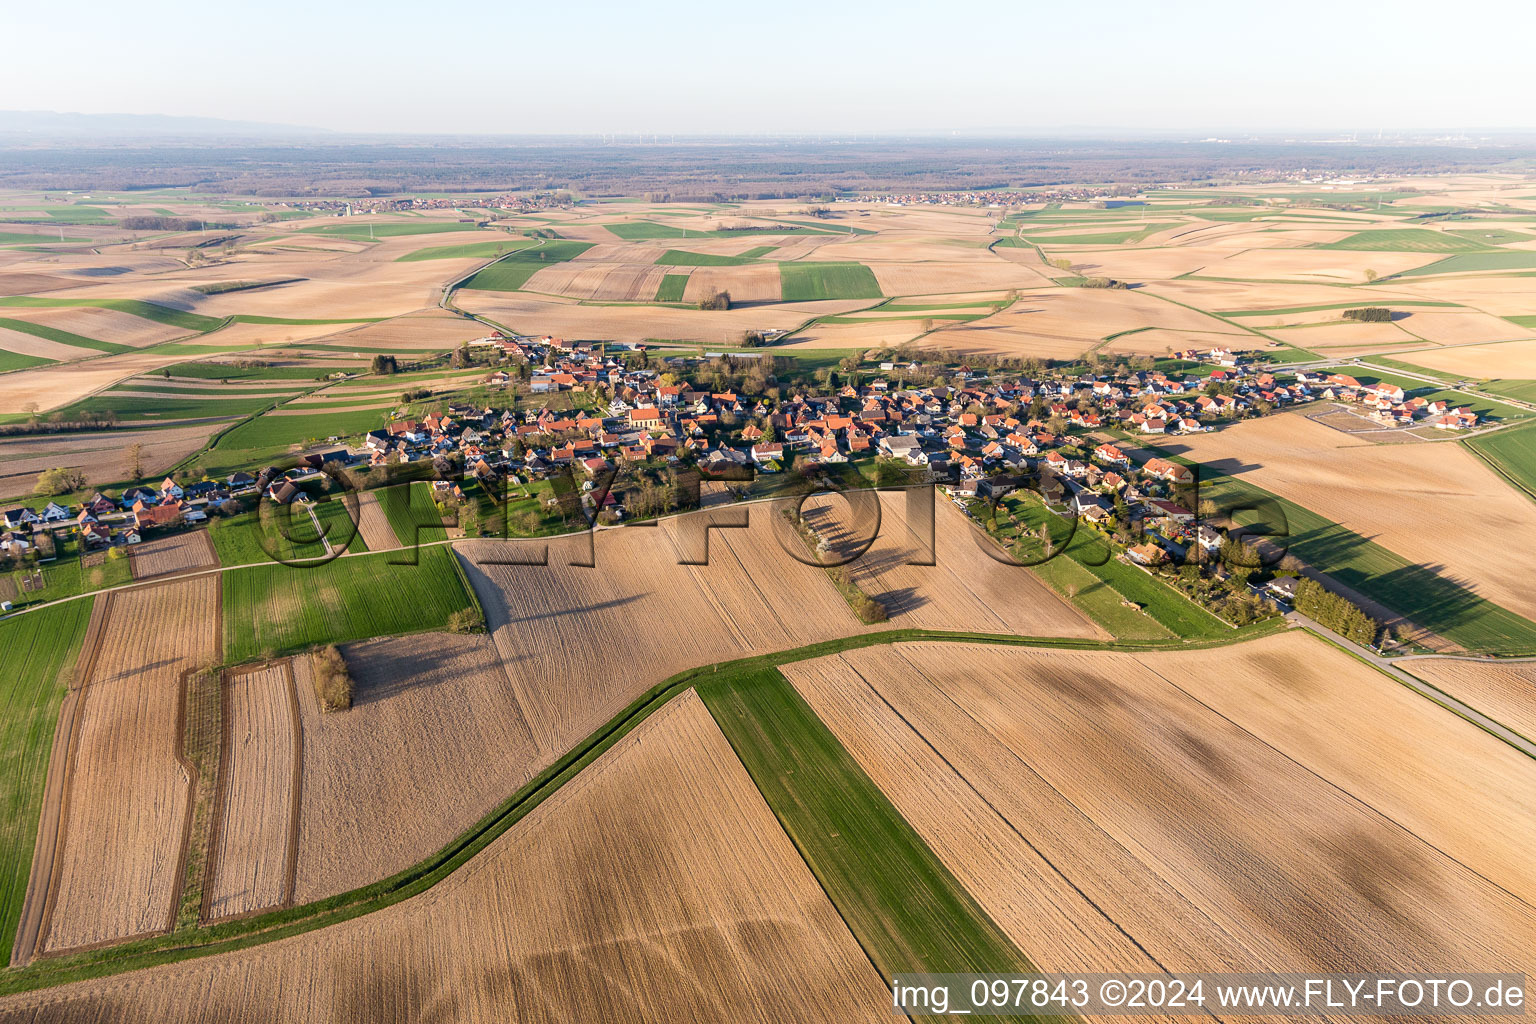 Village - view on the edge of agricultural fields and farmland in Oberlauterbach in Grand Est, France